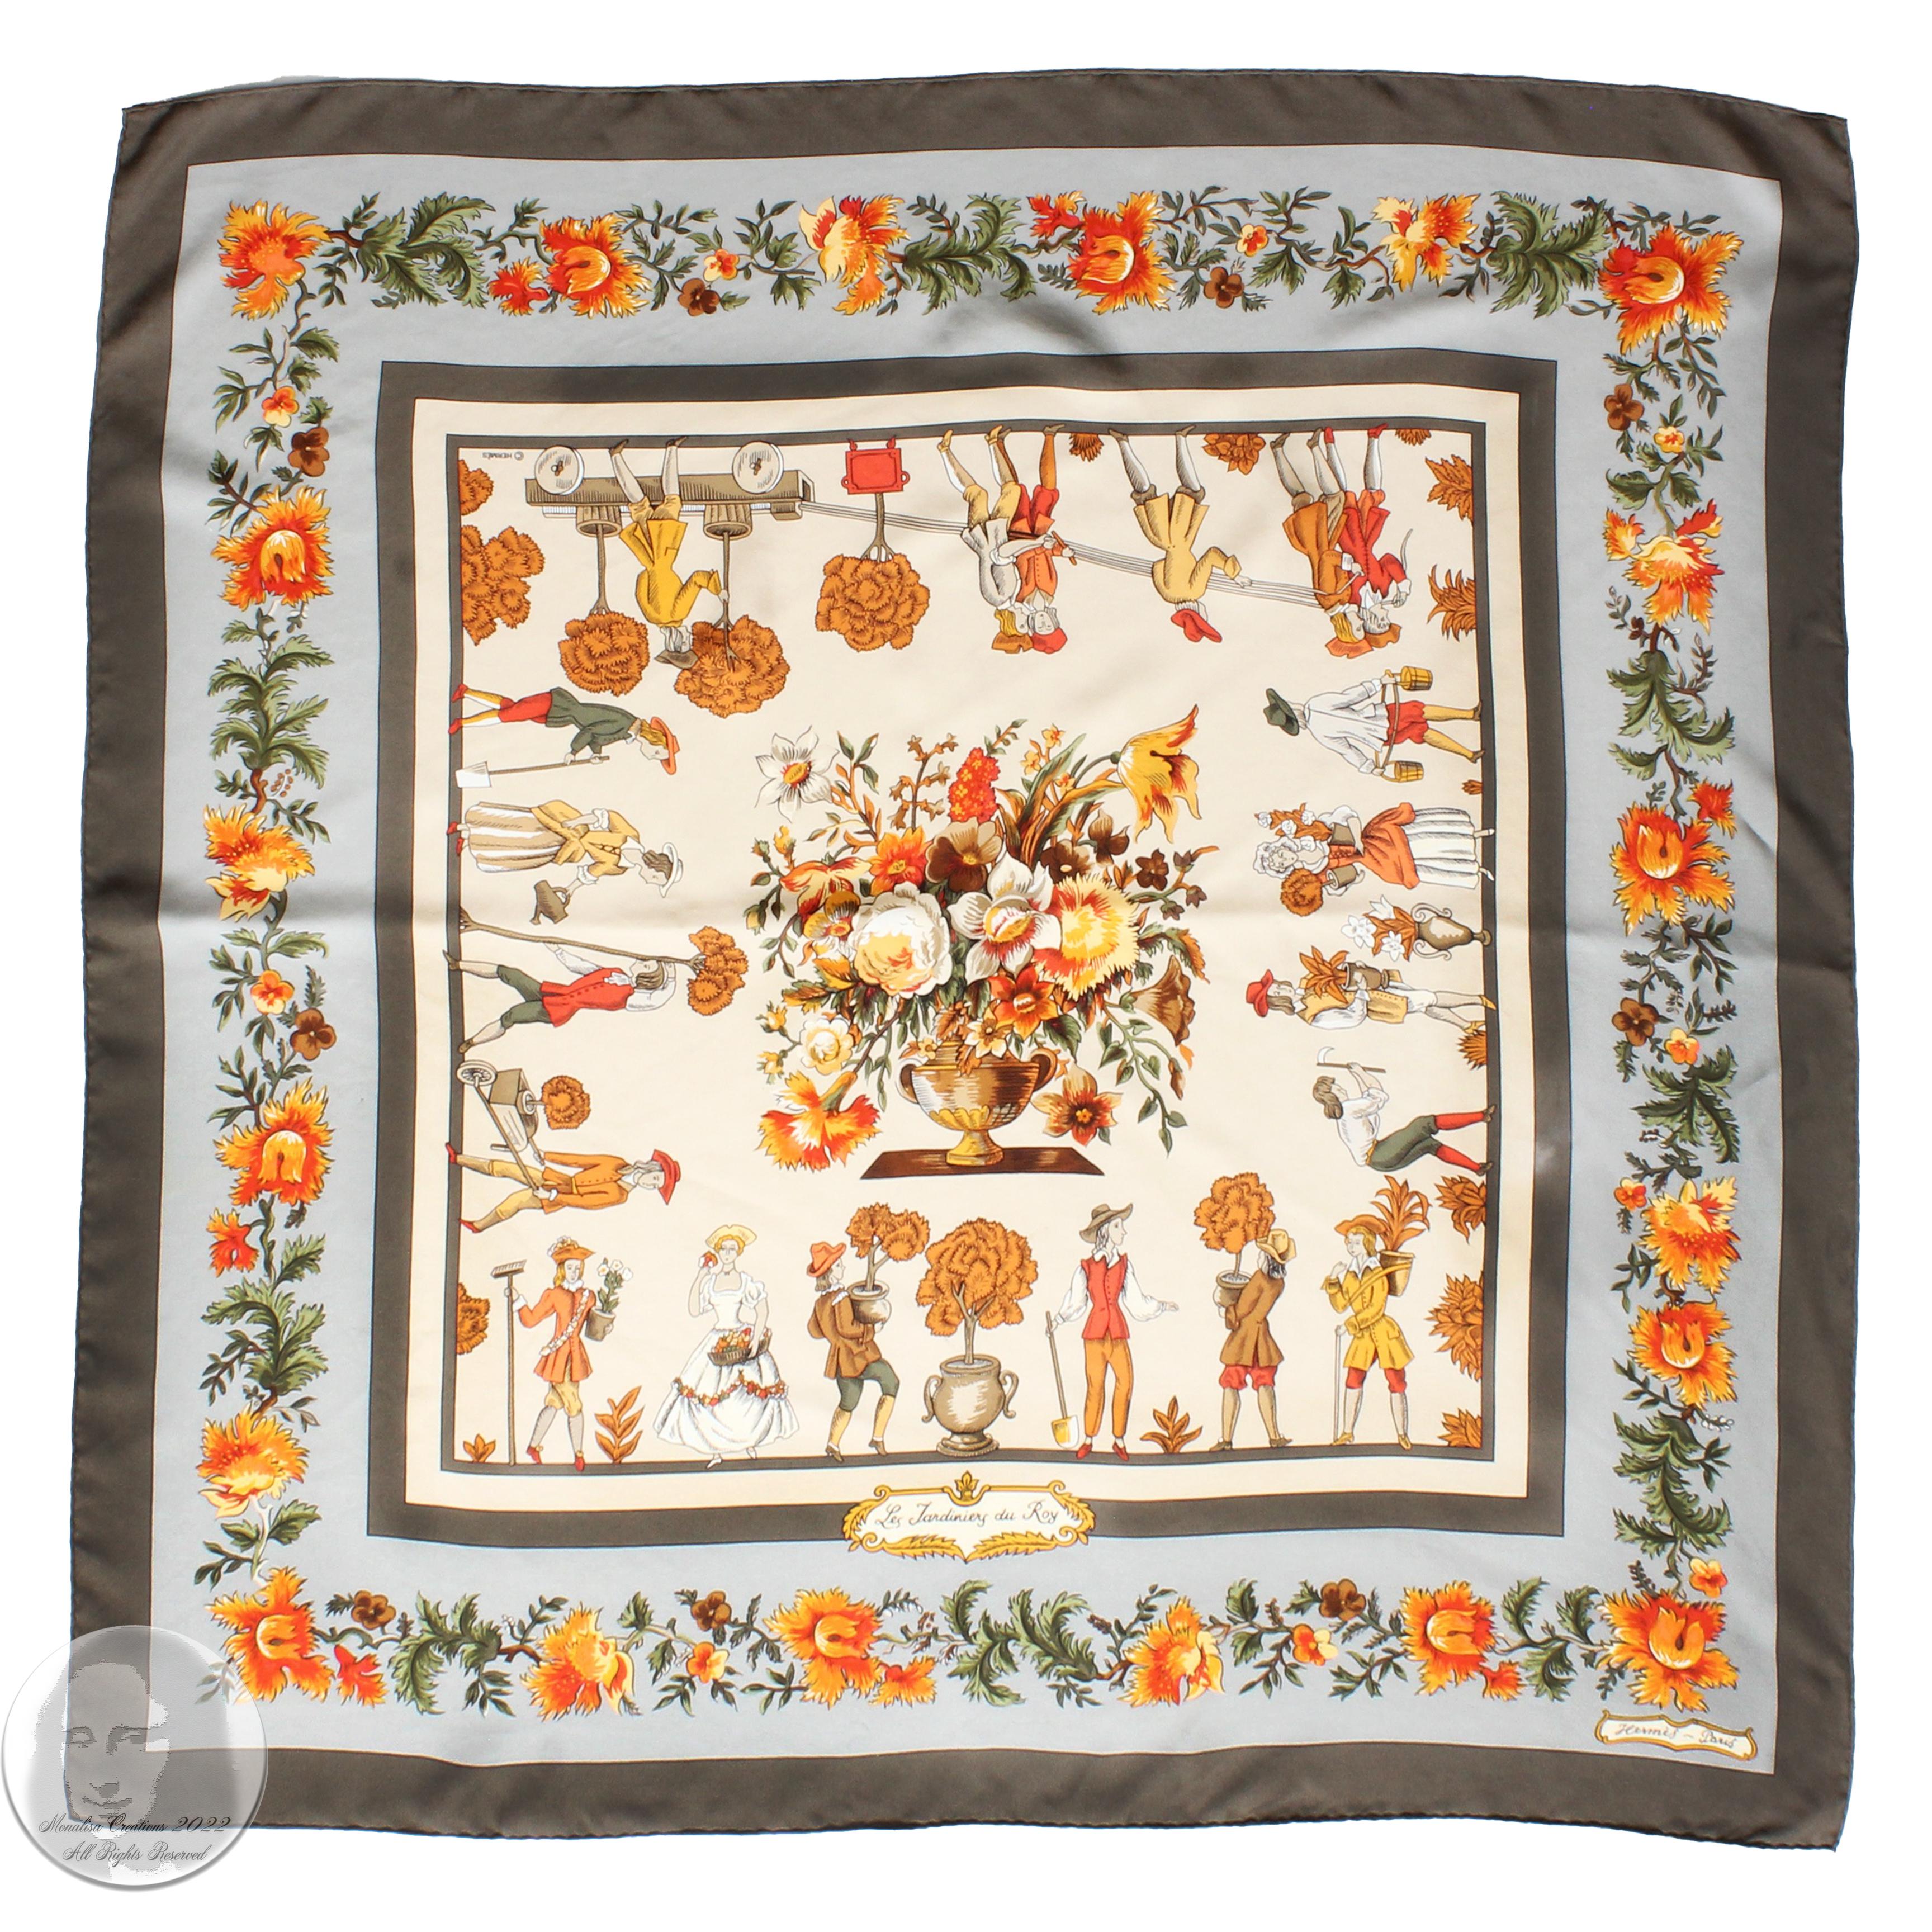 Authentic, preowned, vintage Hermes silk twill scarf or shawl, designed by French artist and illustrator Maurice Tranchant in 1967. A fabulous design featuring an olive border with bold florals and figurals throughout. It still retains its care